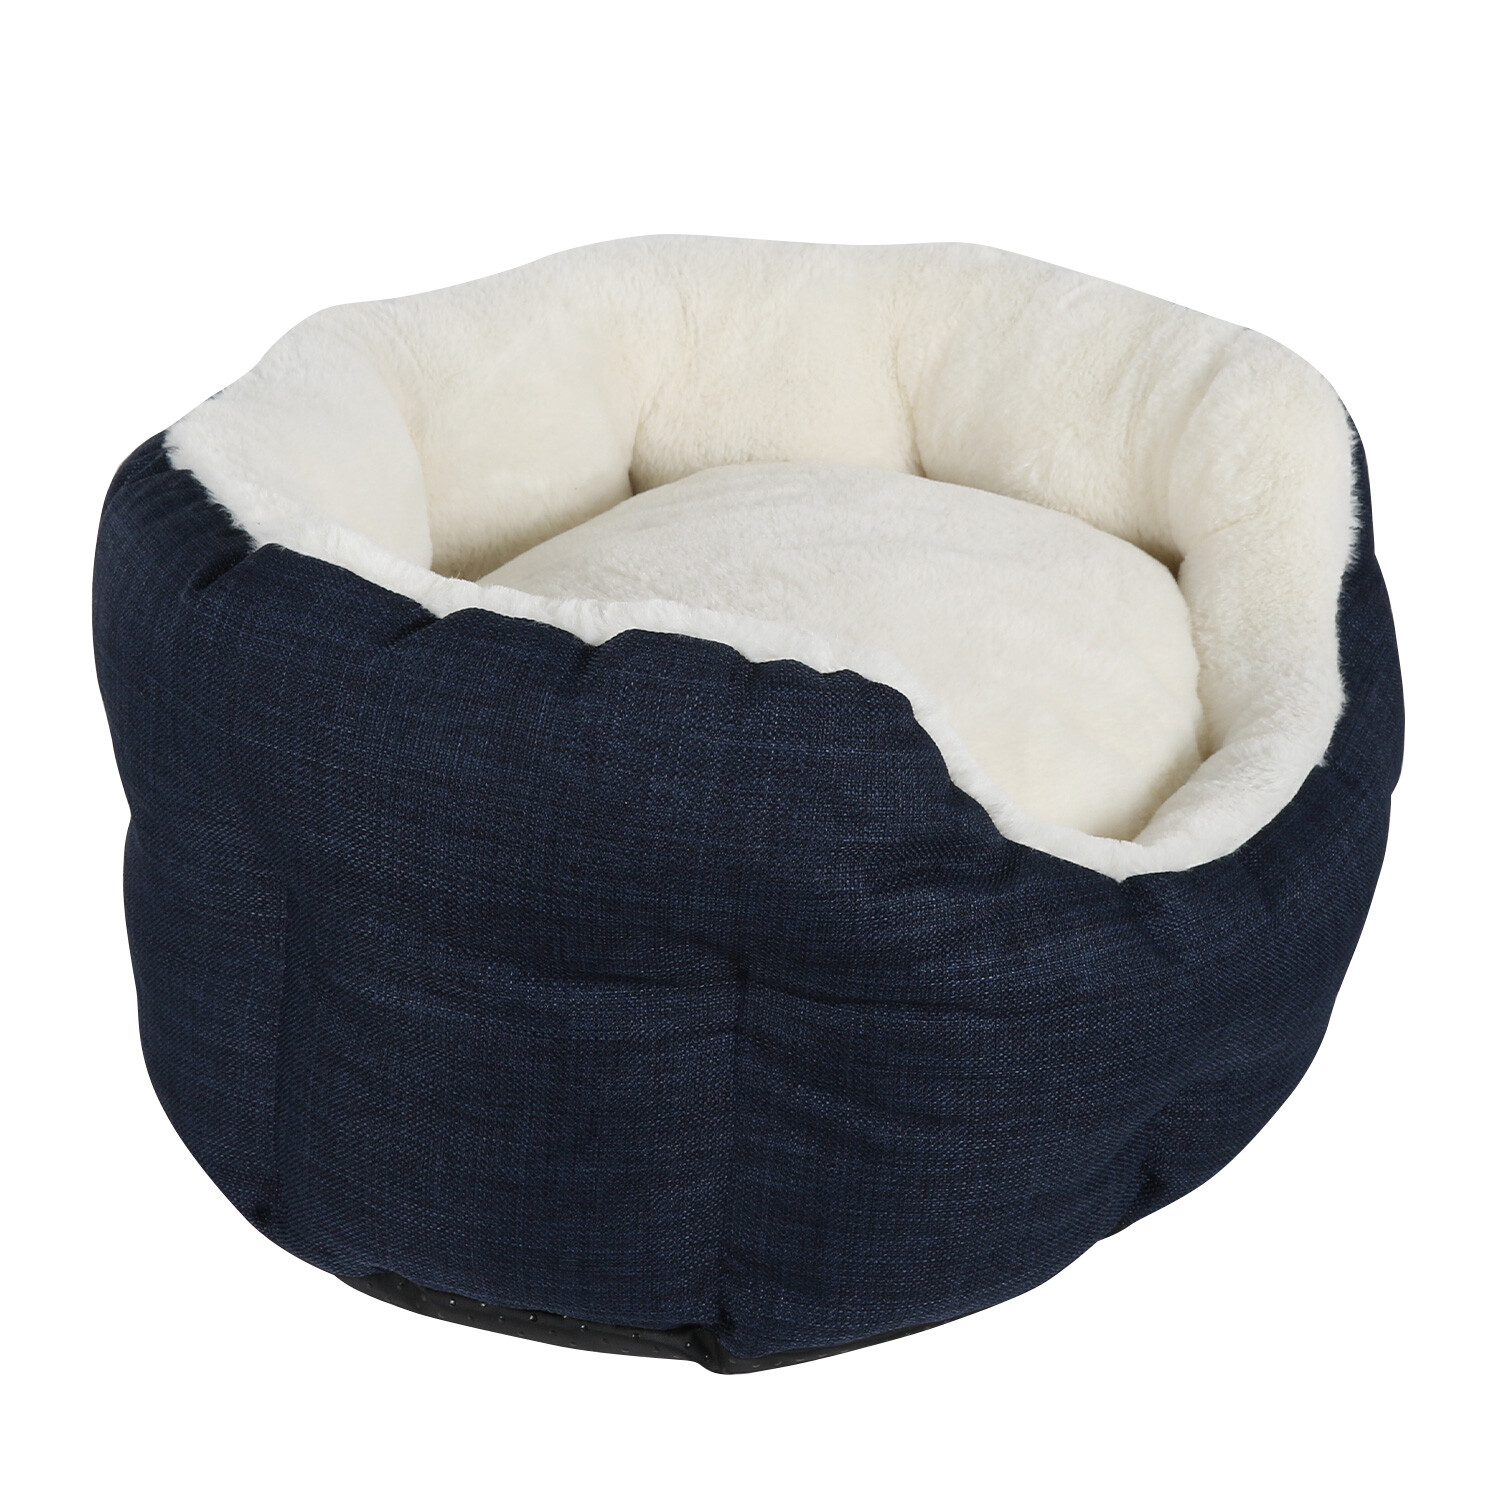 Clever Paws Luxury Small Navy Pet Bed Image 3